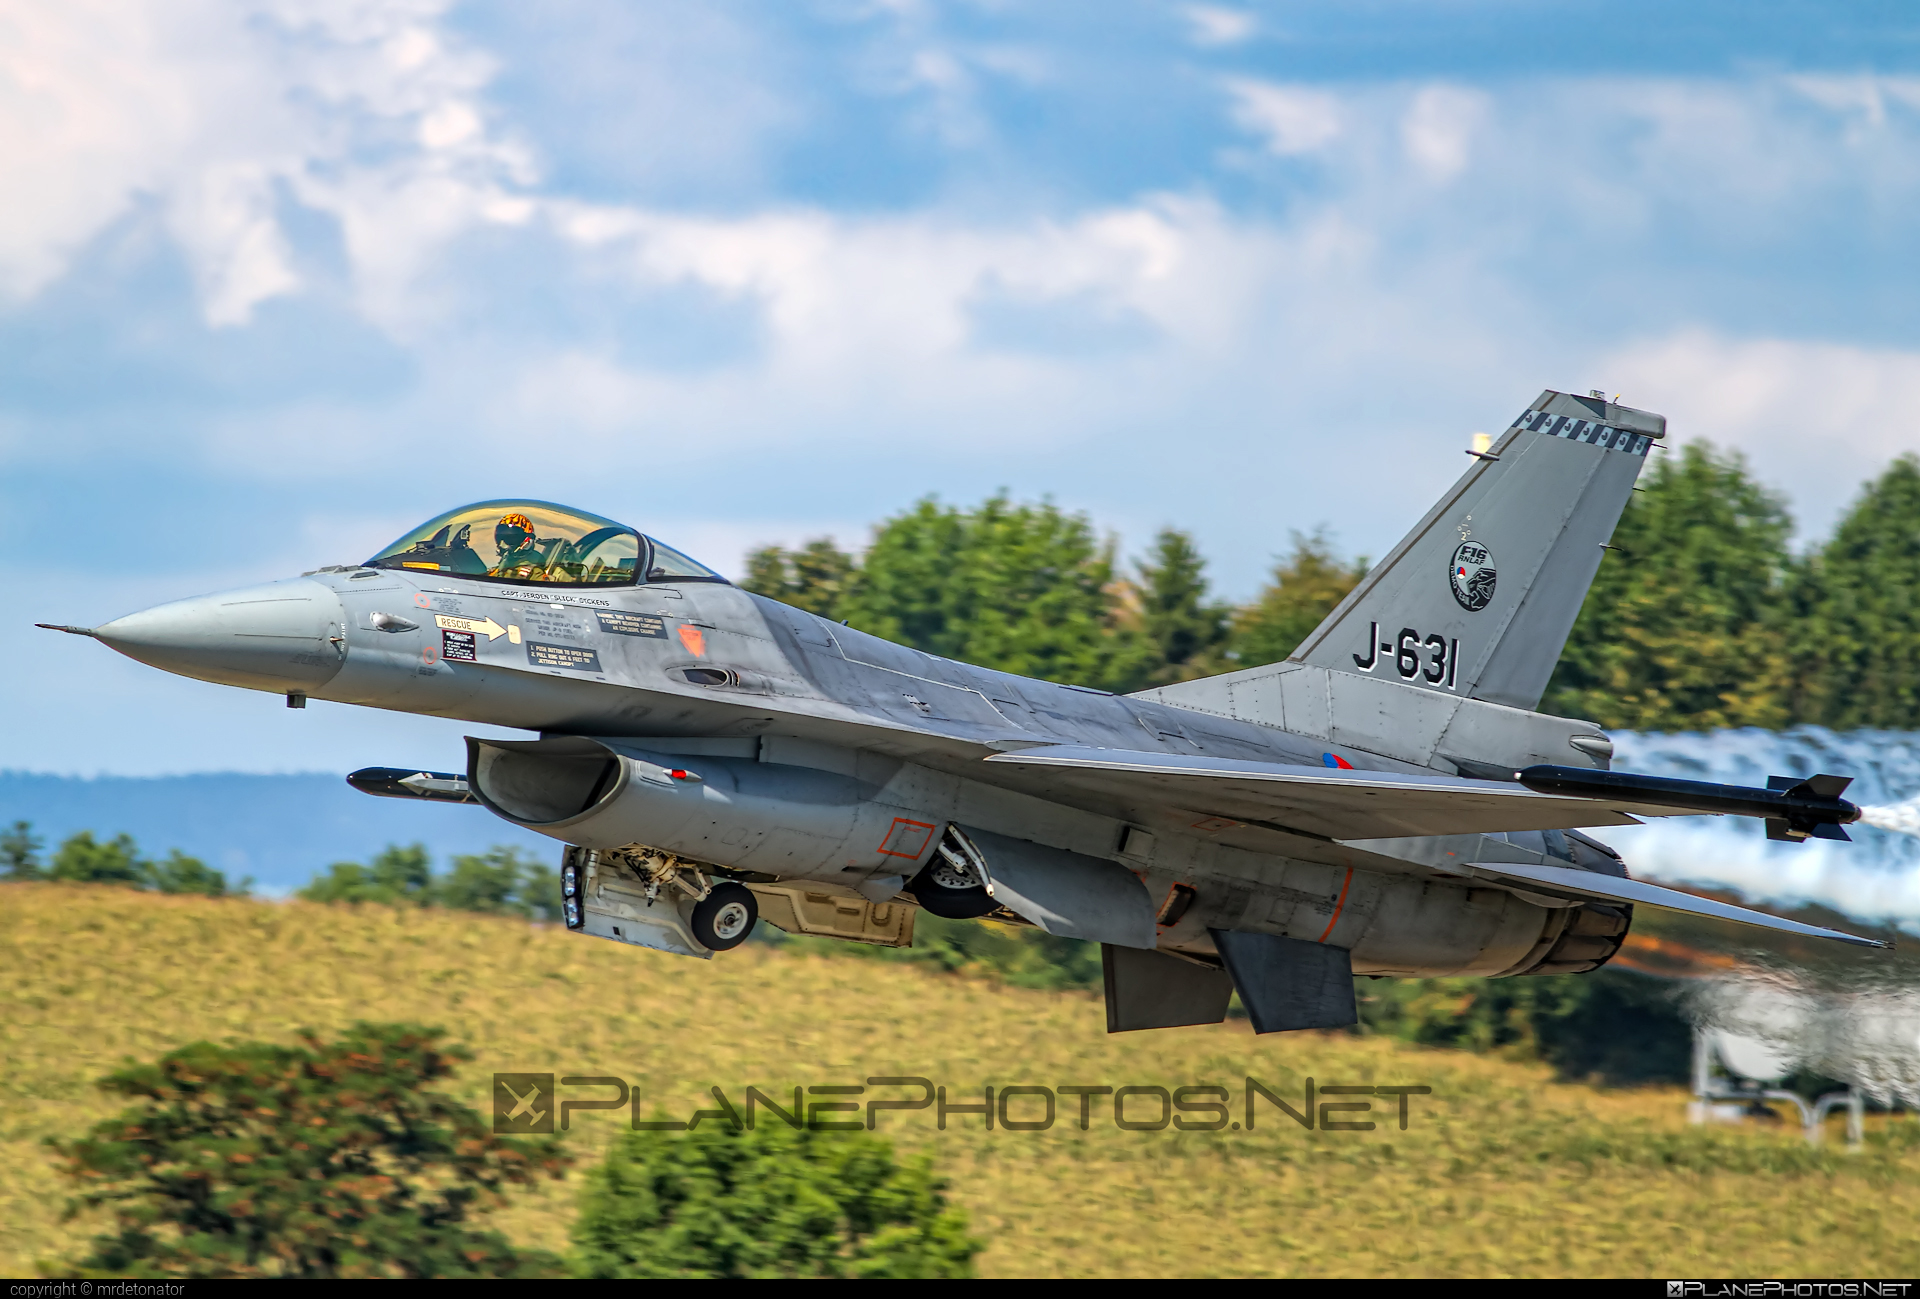 Fokker F-16AM Fighting Falcon - J-631 operated by Koninklijke Luchtmacht (Royal Netherlands Air Force) #air14 #f16 #f16am #fightingfalcon #fokker #koninklijkeluchtmacht #royalnetherlandsairforce